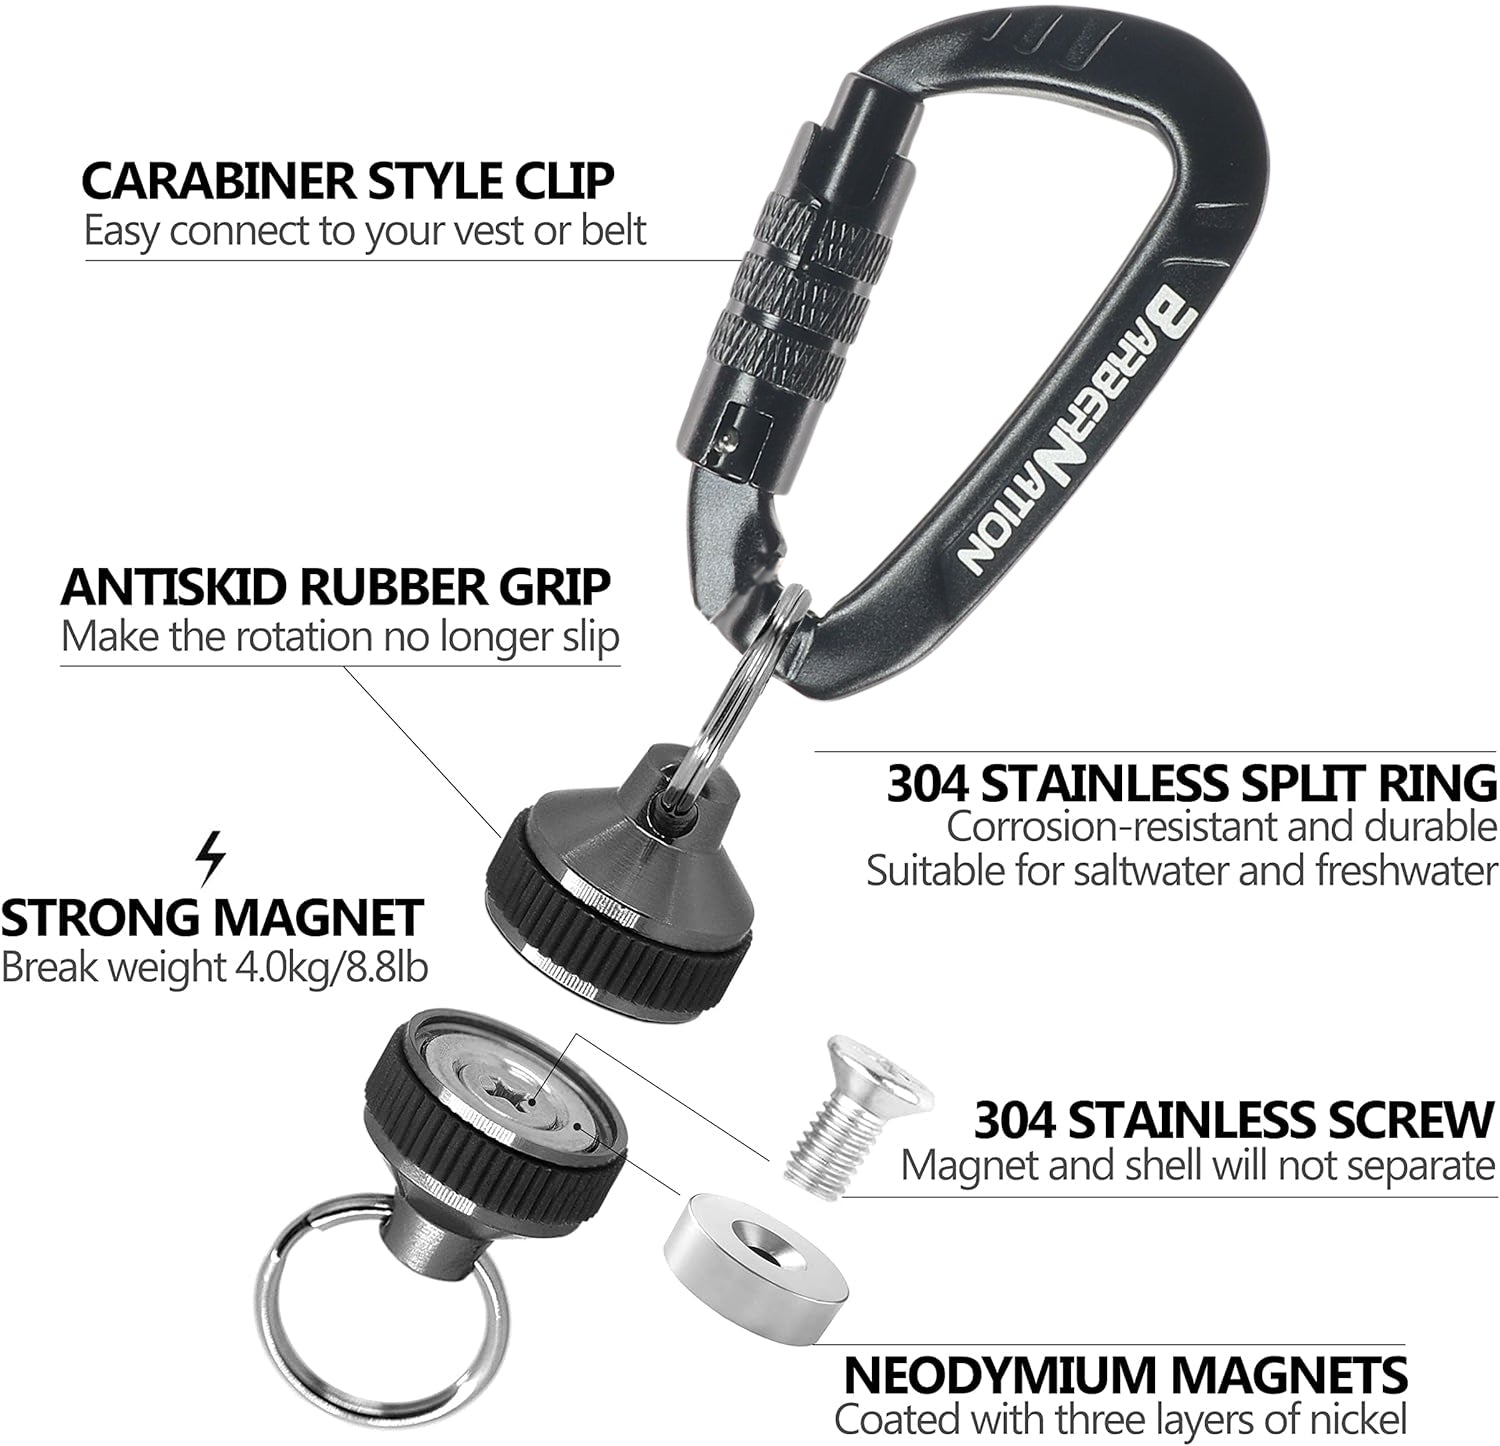 BarberNation Carabiner Pro (2x) with Super Strong Magnet Modules (3x)